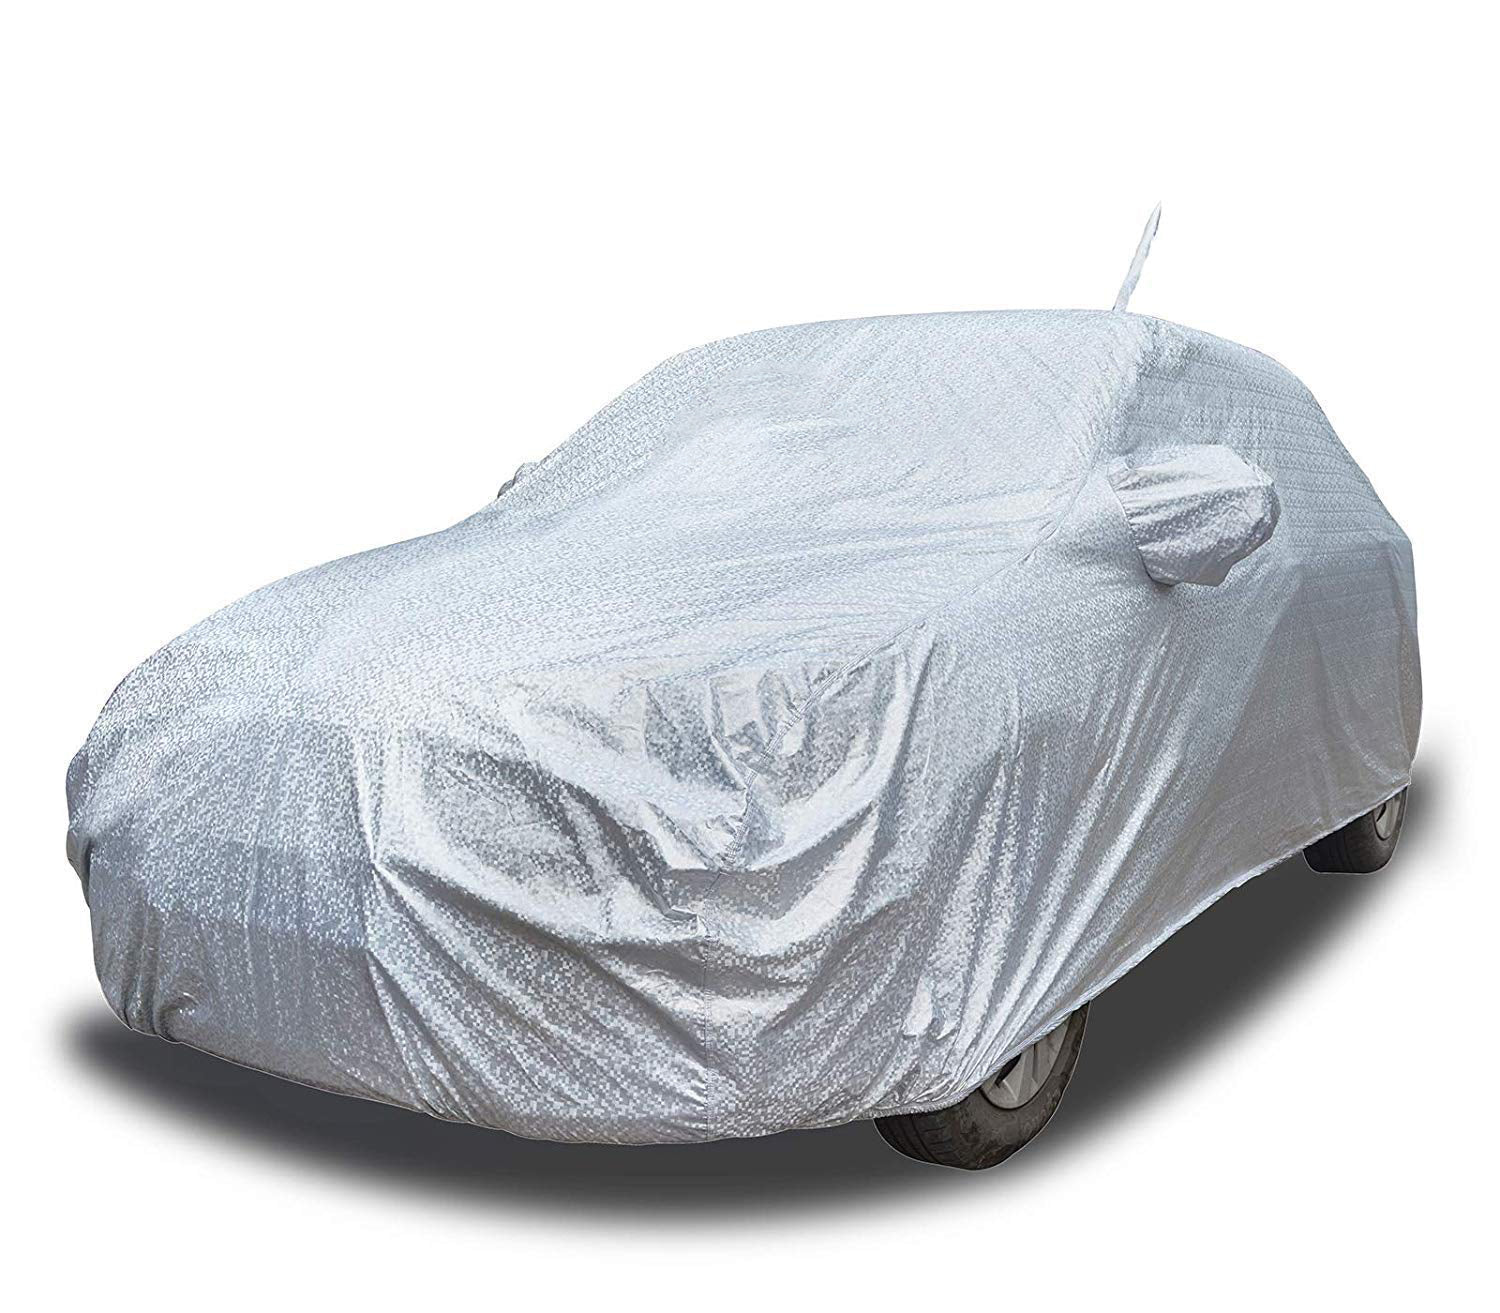 Platinum Shield Weatherproof Car Cover Compatible with 2012